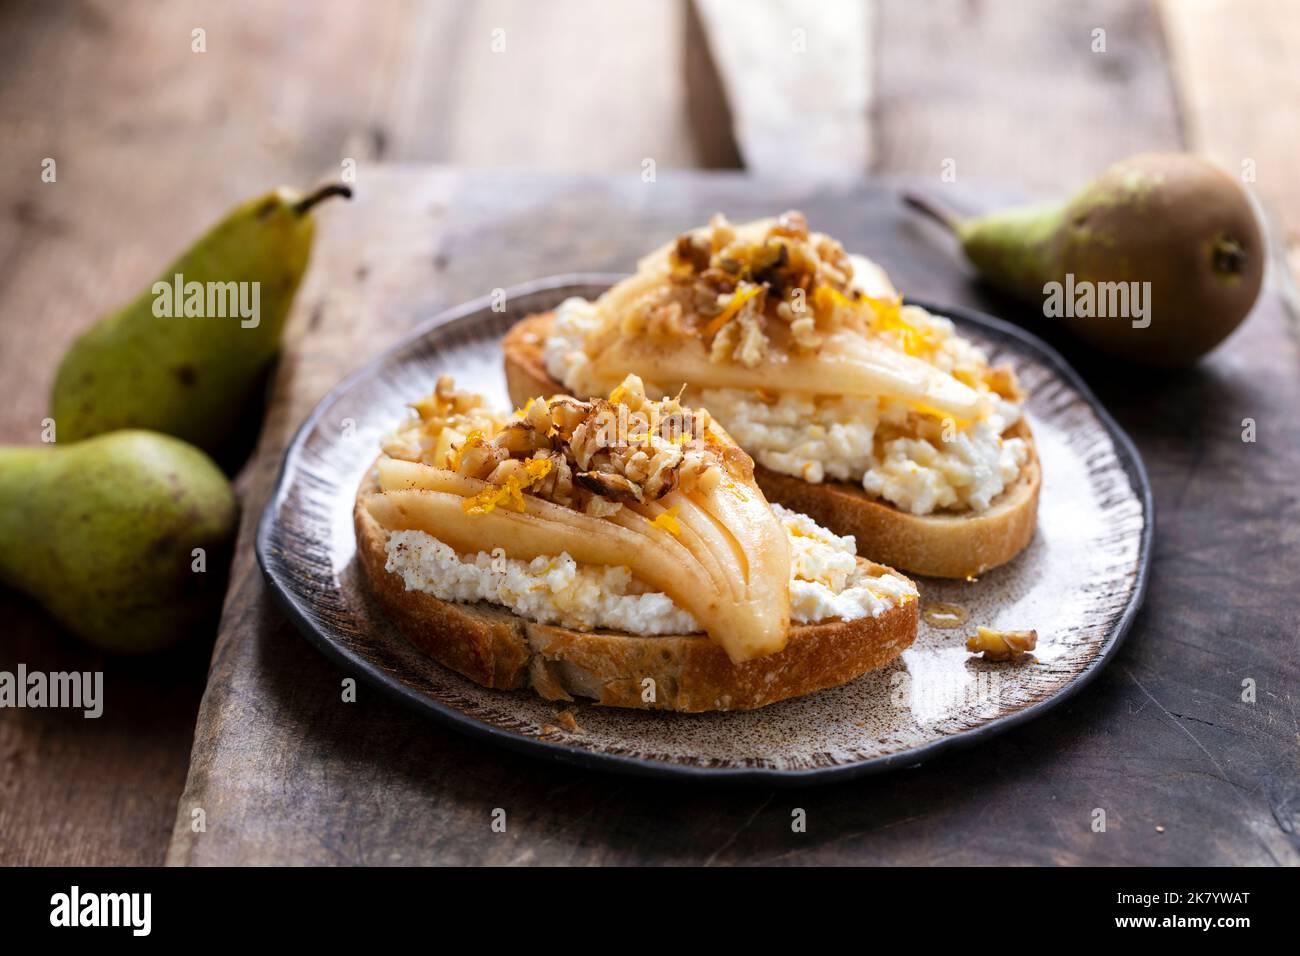 Toast with ricotta cheese, pears, walnuts and honey Stock Photo